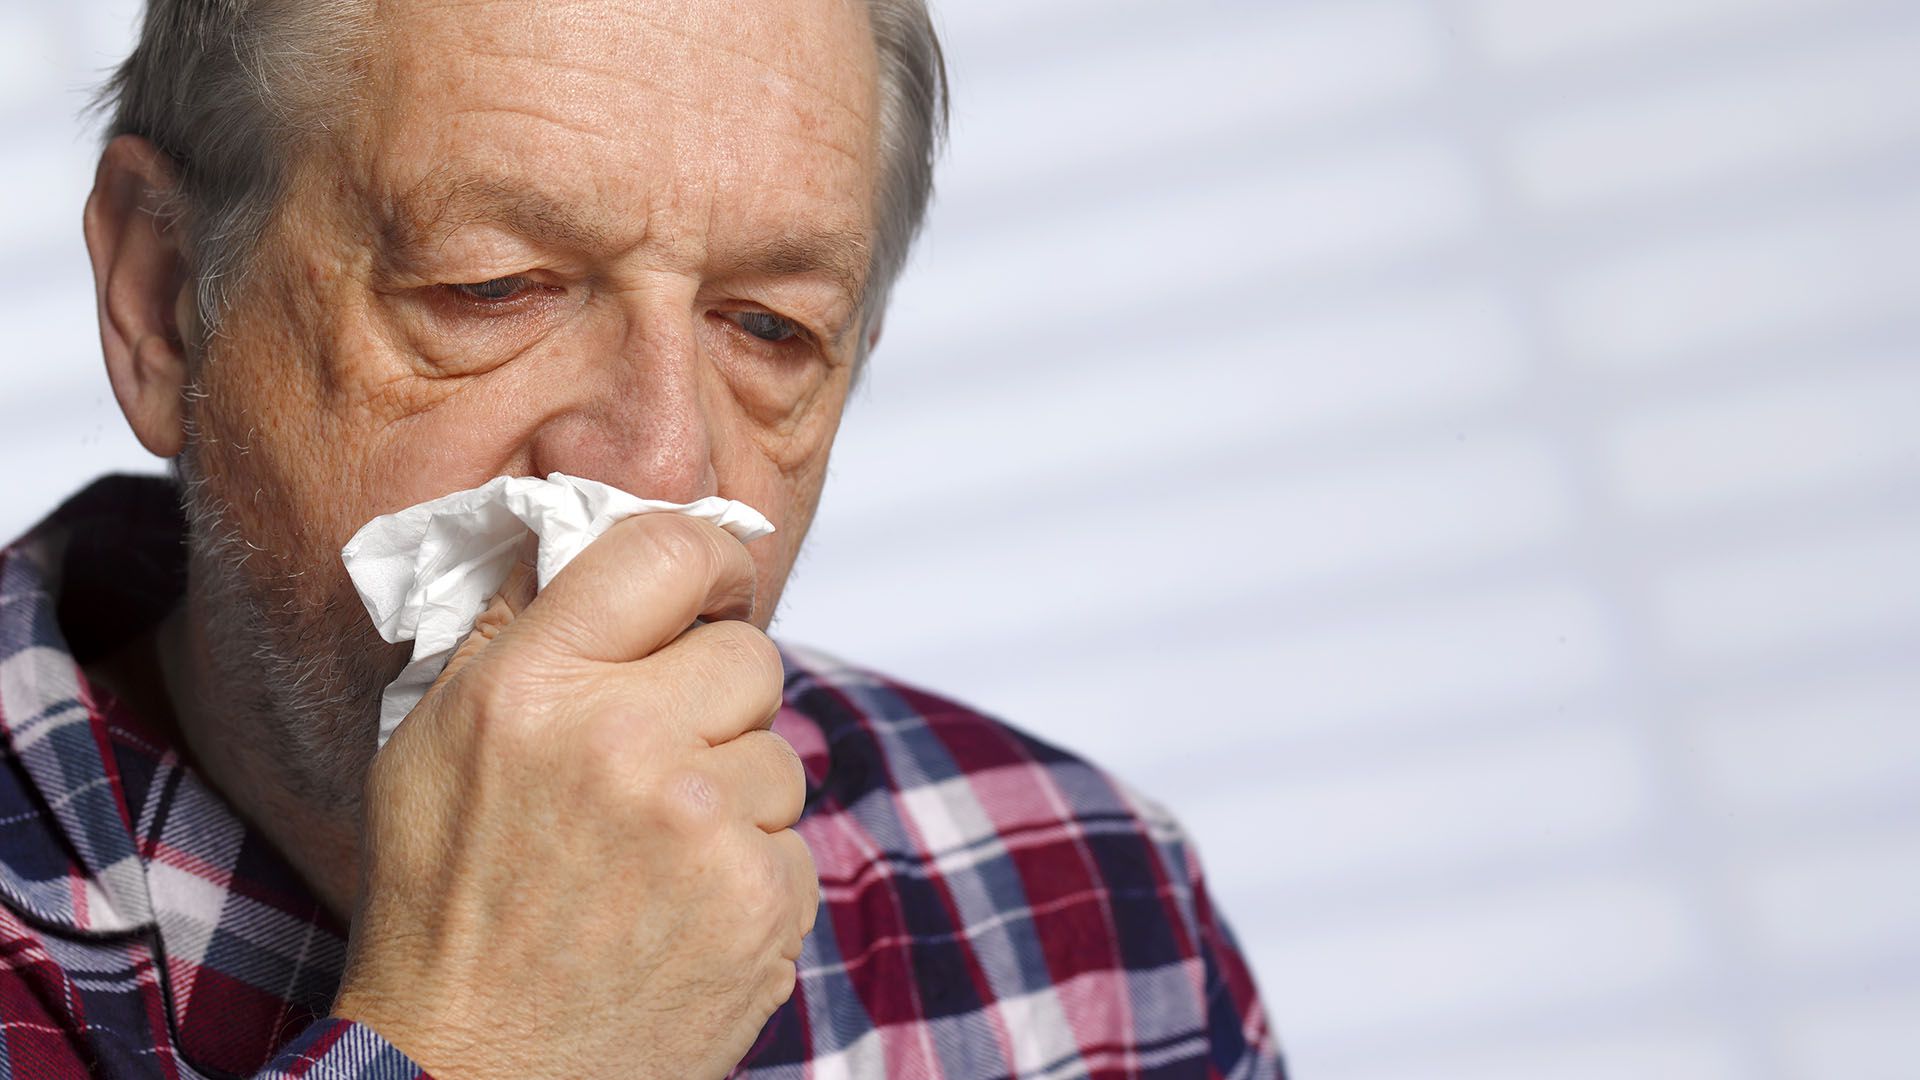 Influenza is a disease that can bring complications such as pneumonia (Getty)